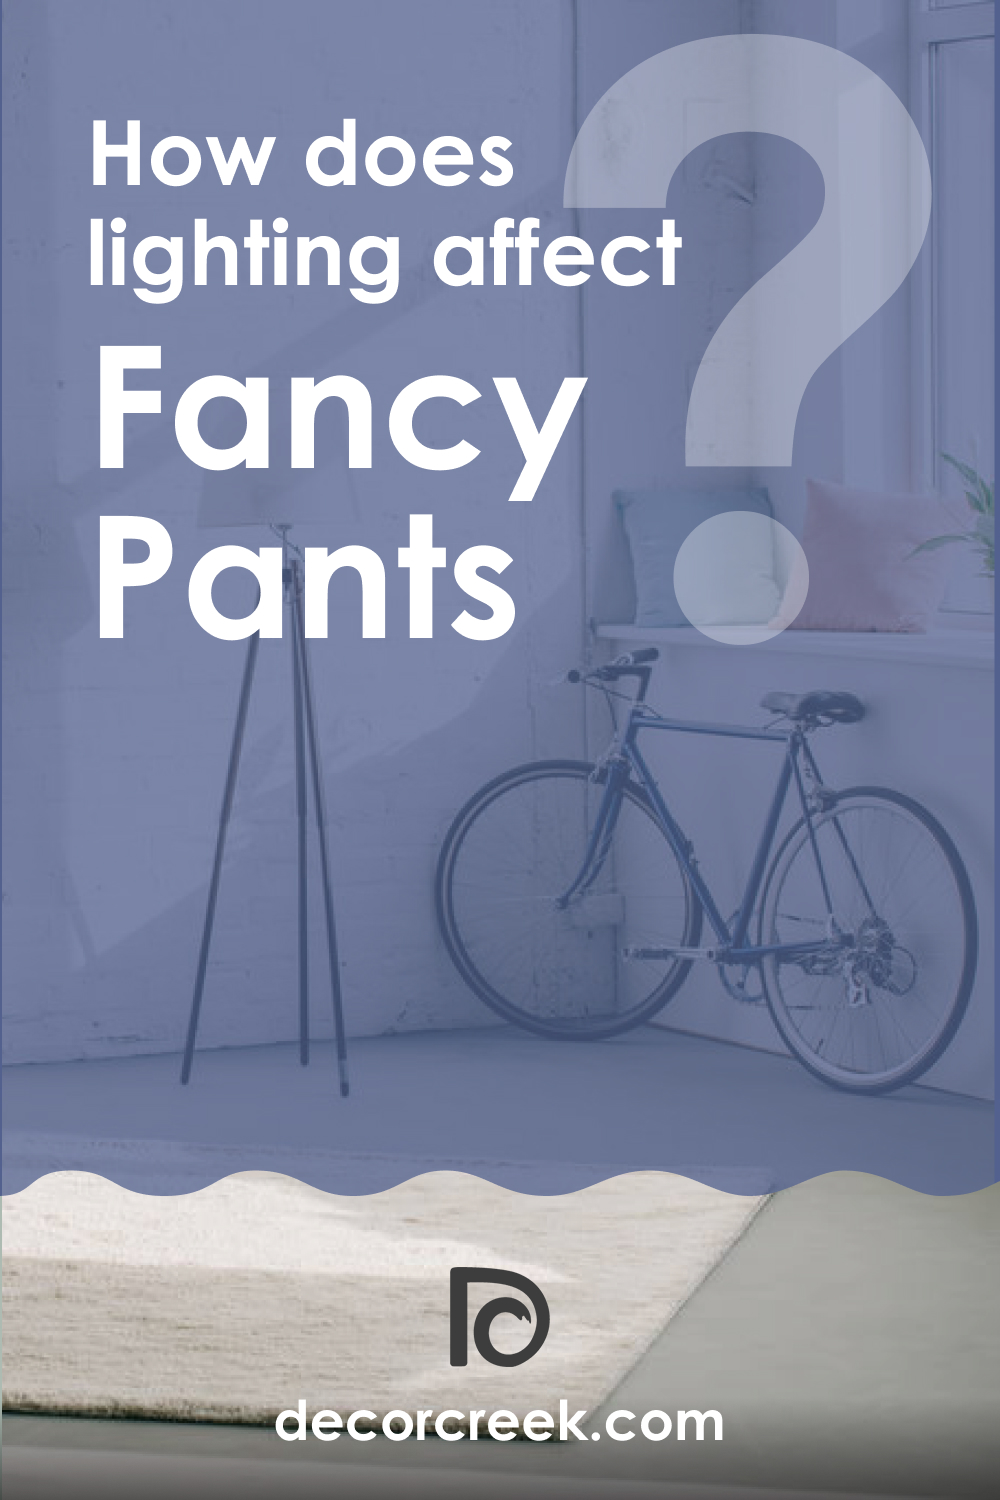 How Does Lighting Affect Fancy Pants CSP-525?